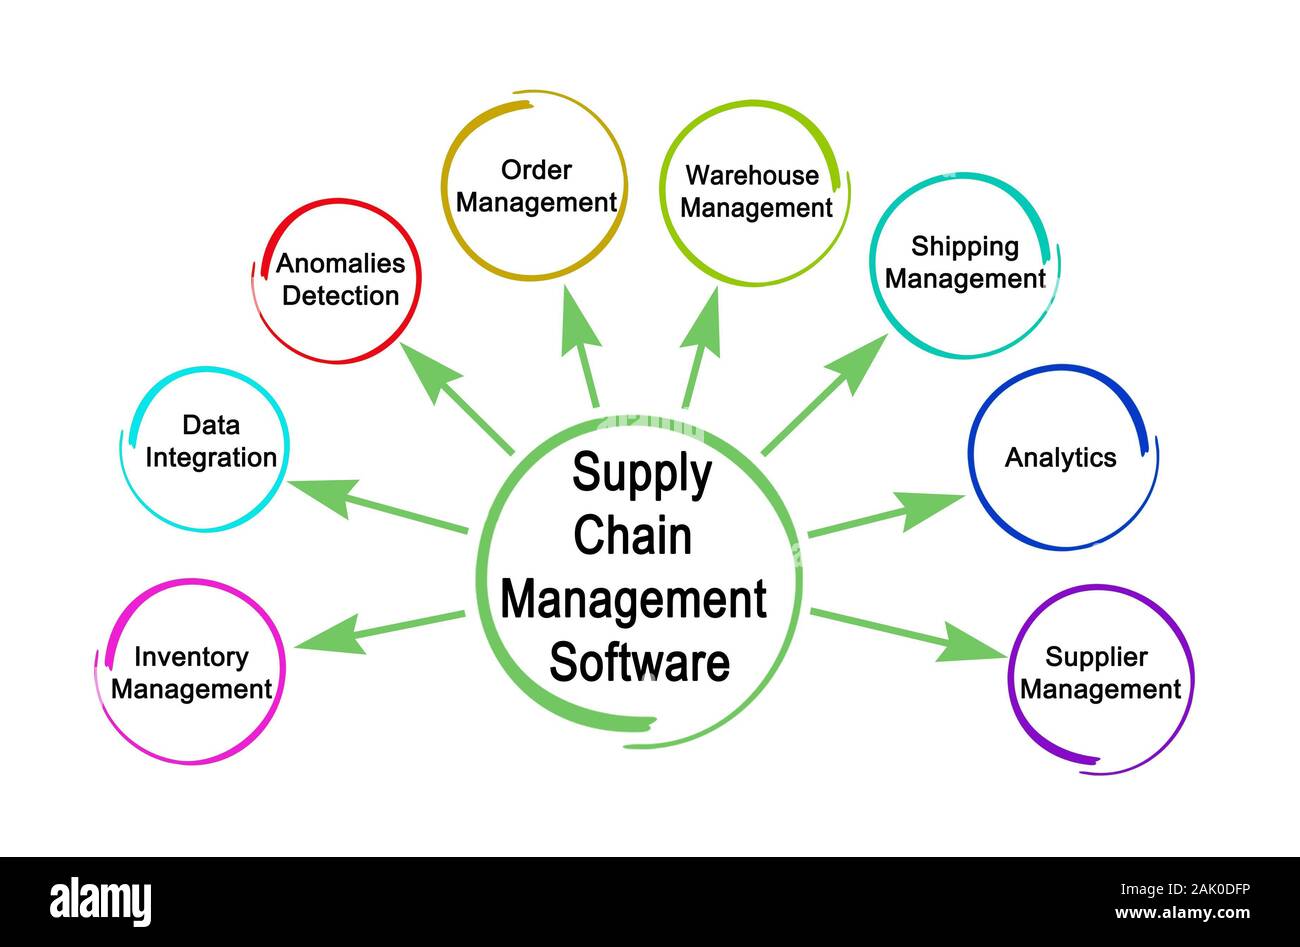 Functions Of Supply Chain Management Software Stock Photo Alamy